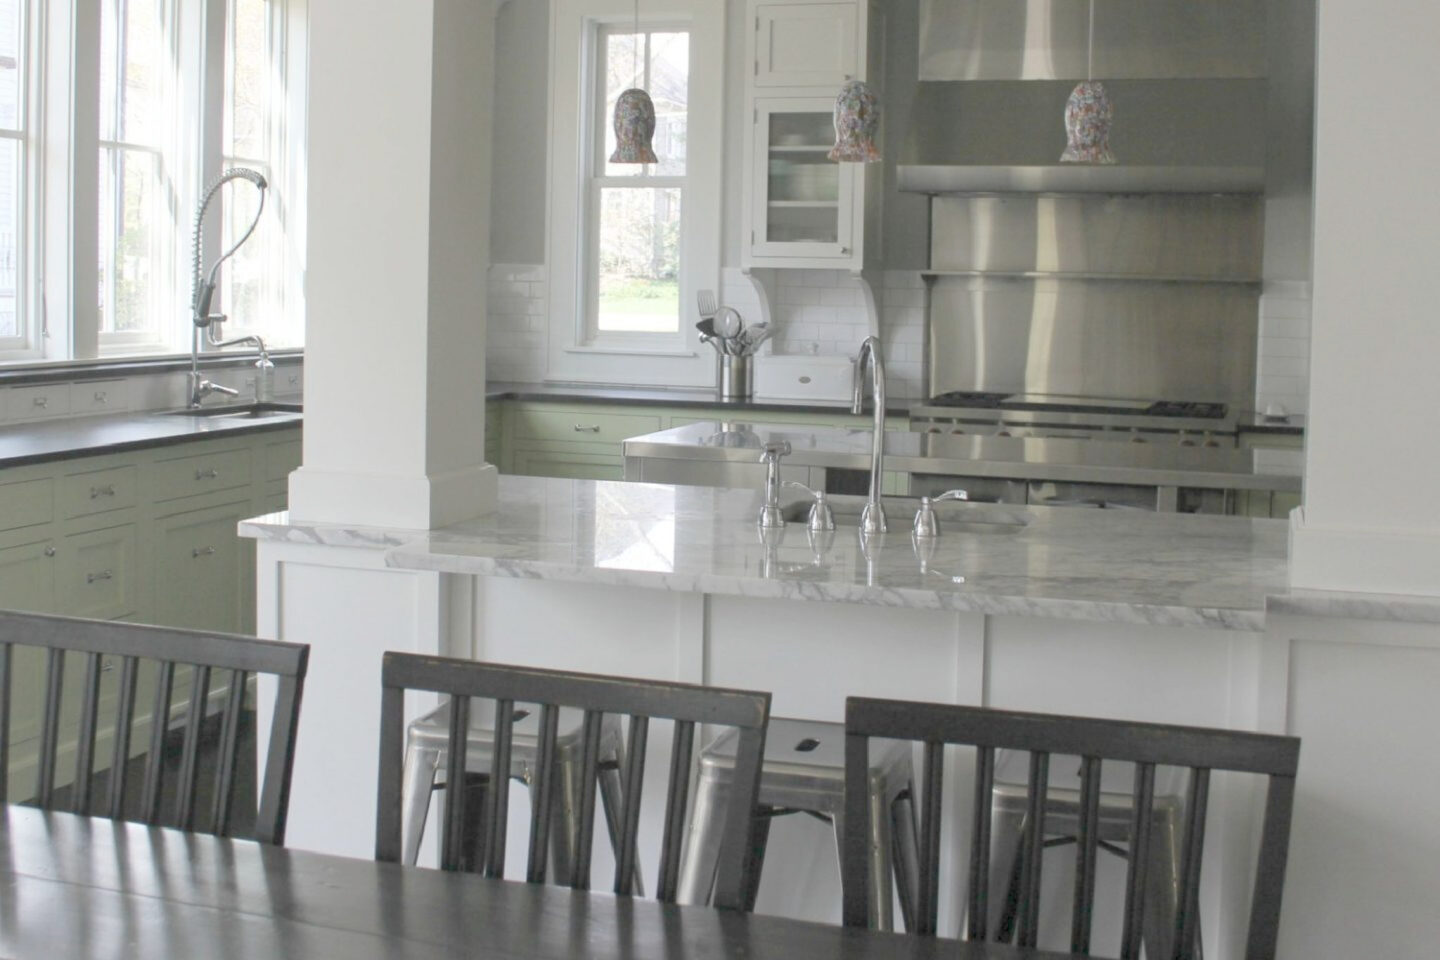 Beautiful modern farmhouse kitchen with industrial accents and commercial style appliances - Hello Lovely Studio.